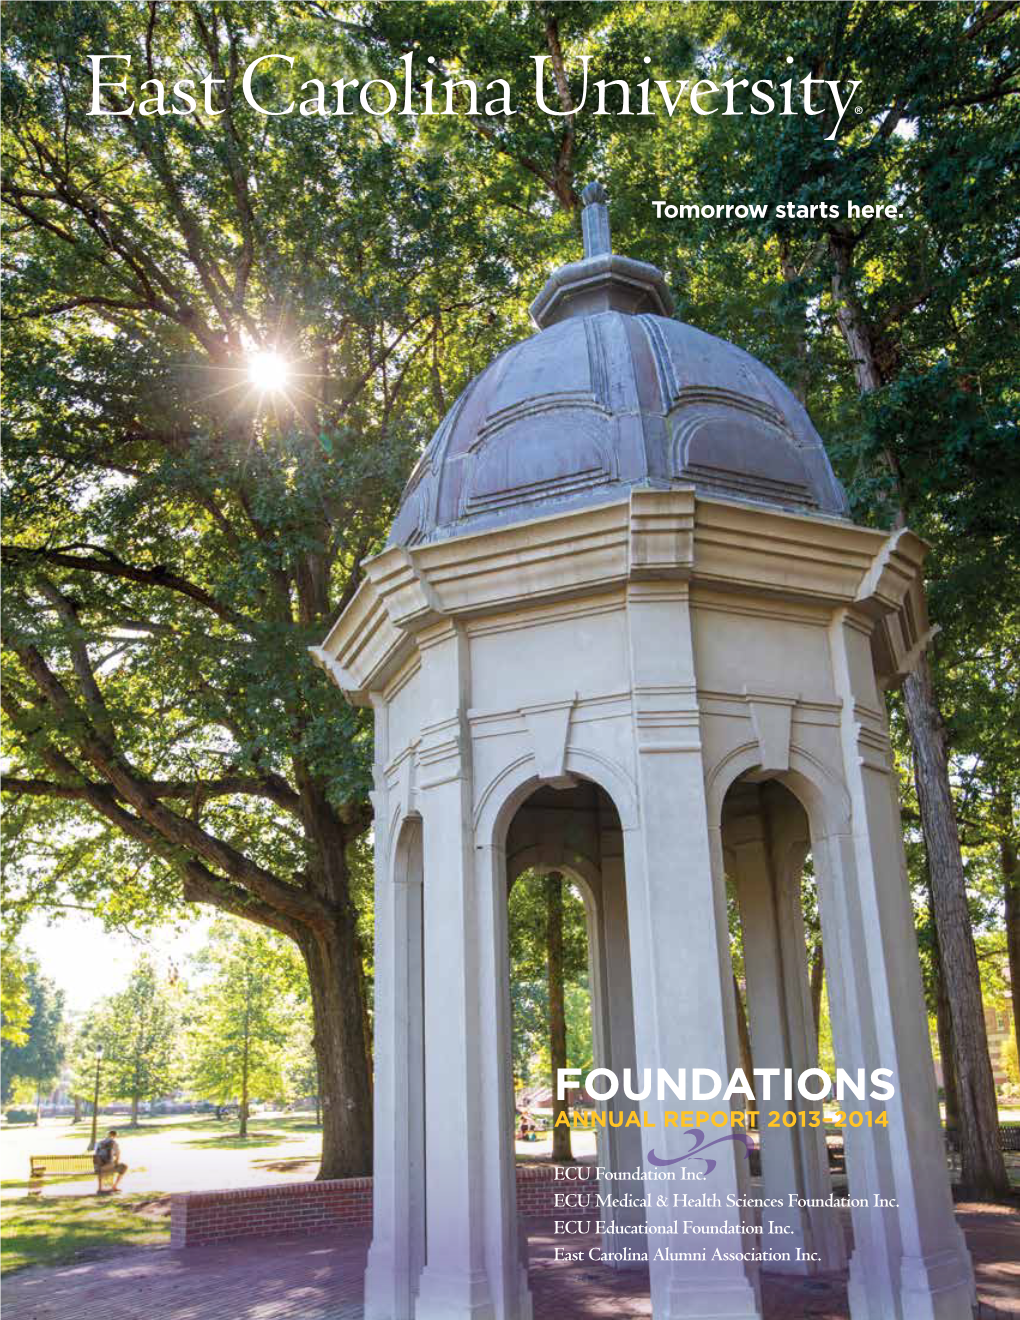 Foundations Annual Report 2013–2014